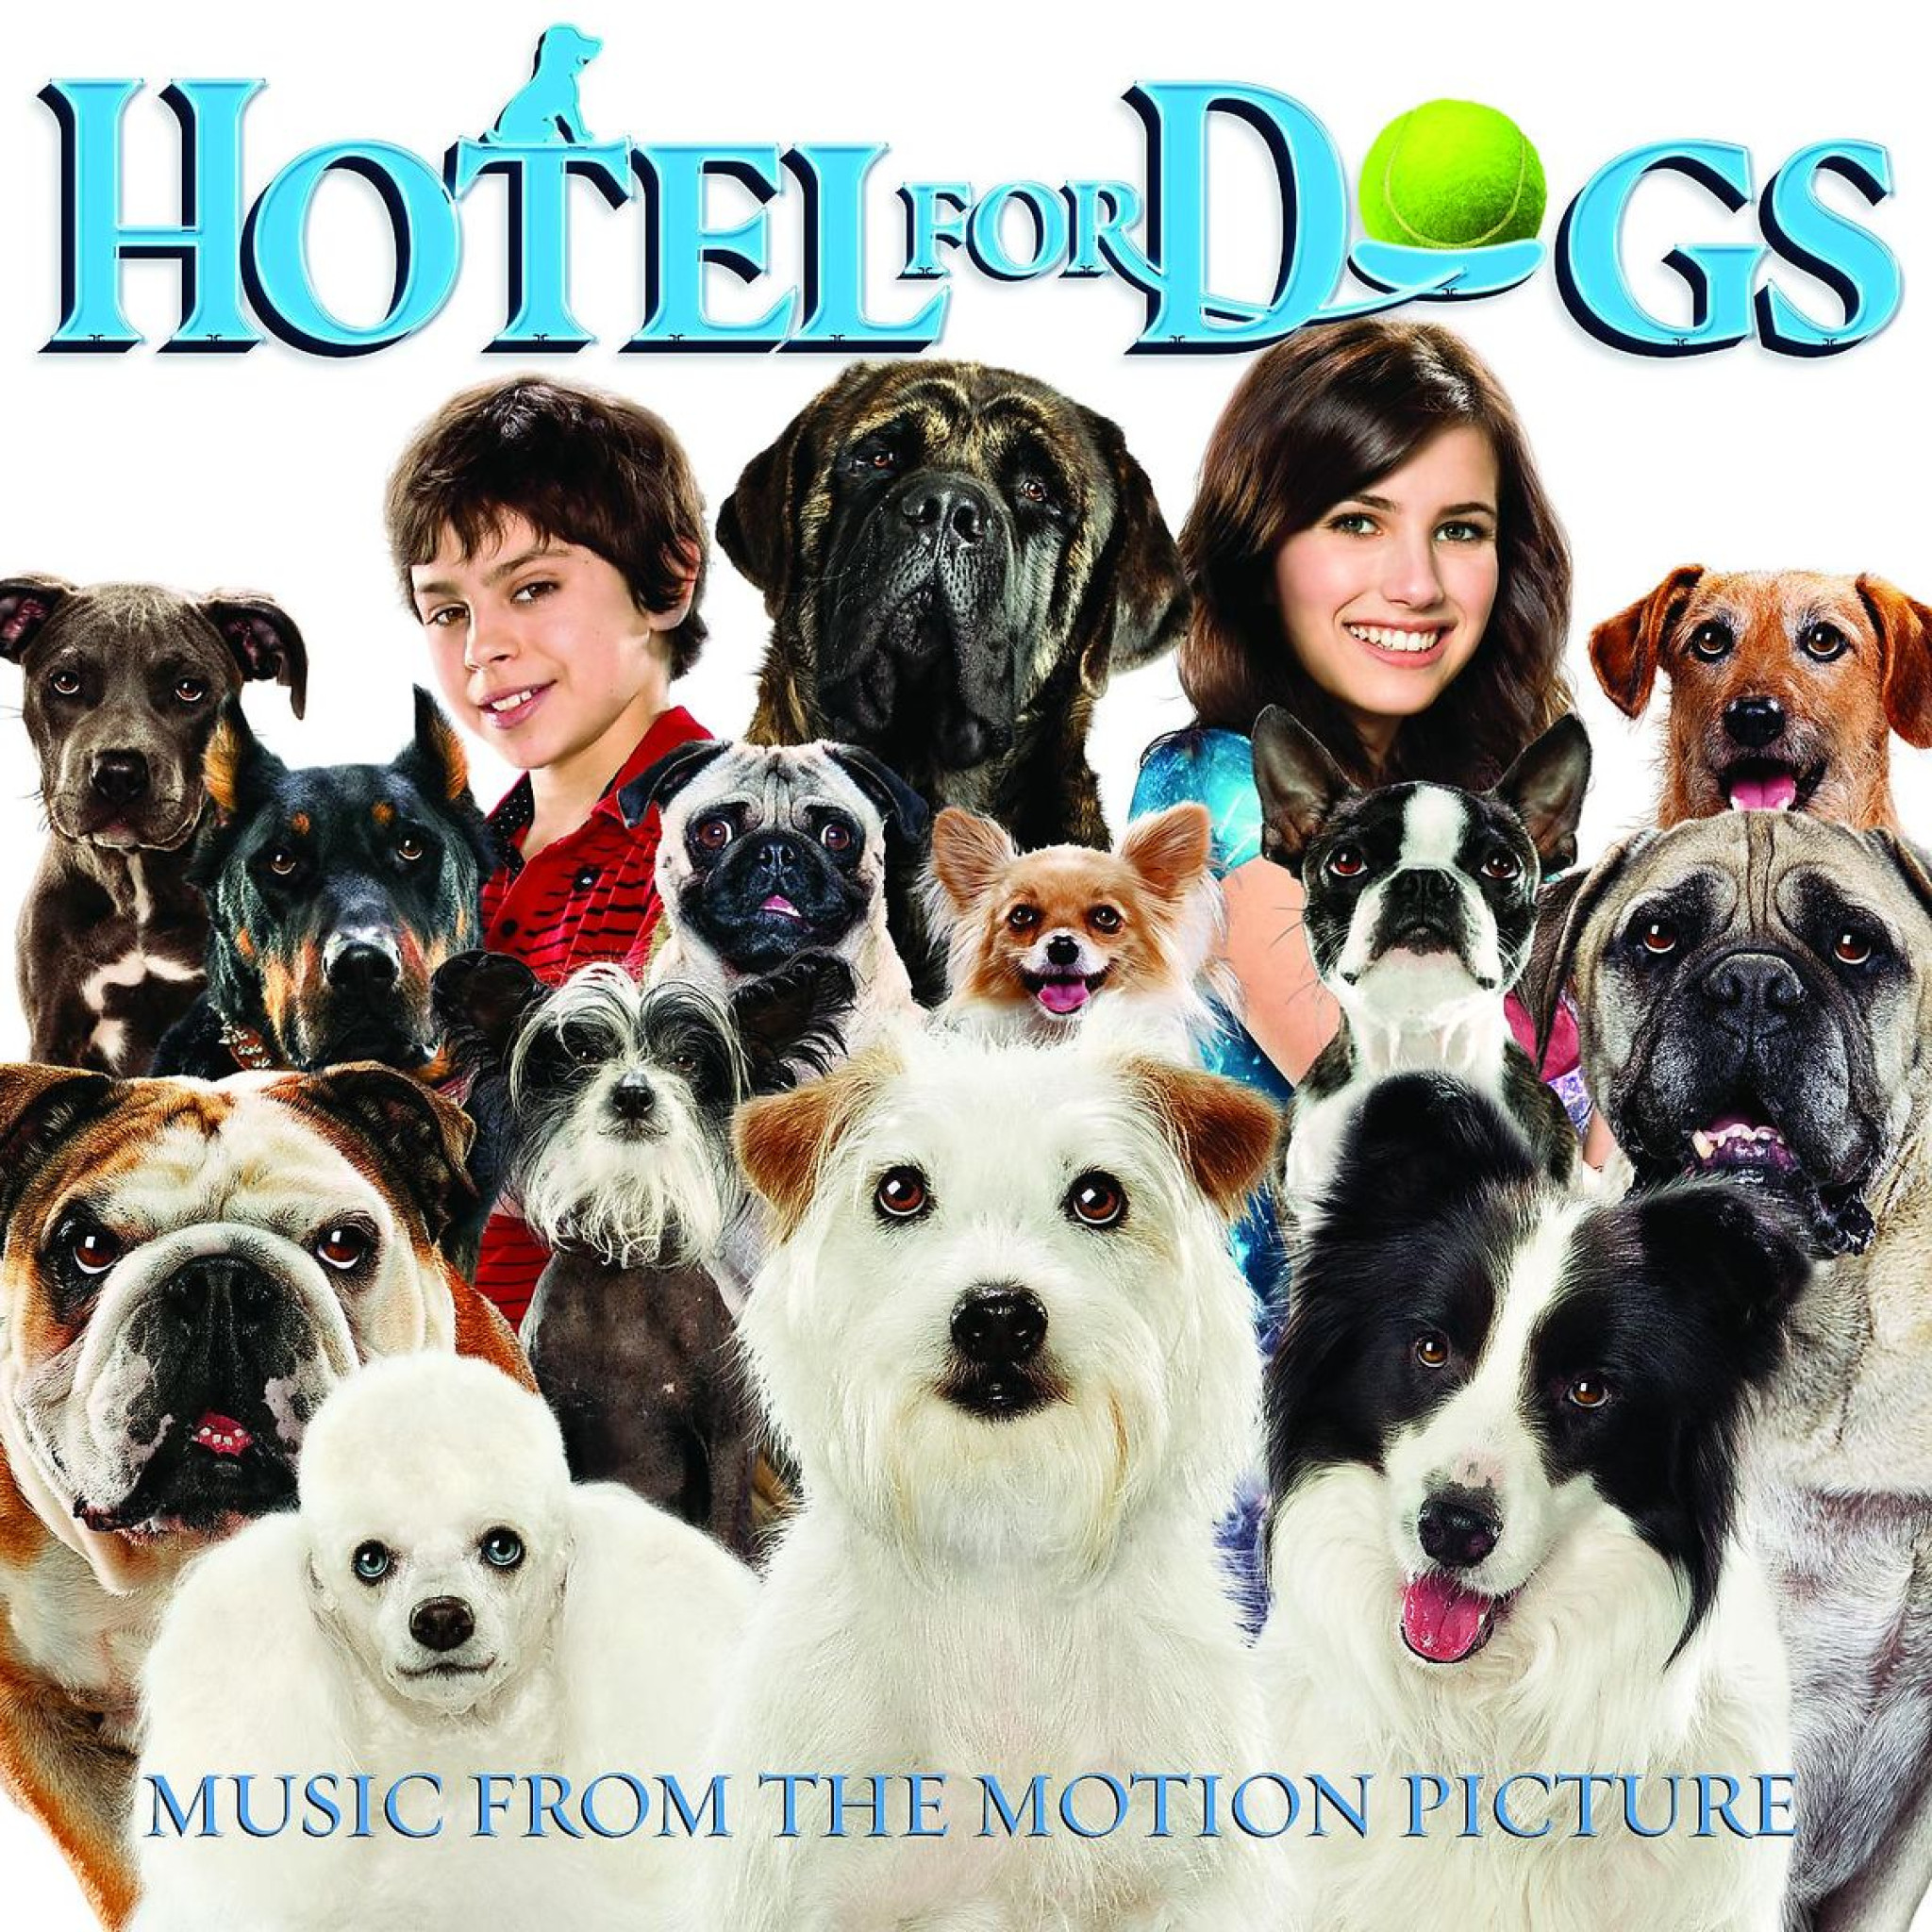 HOTEL FOR DOGS 